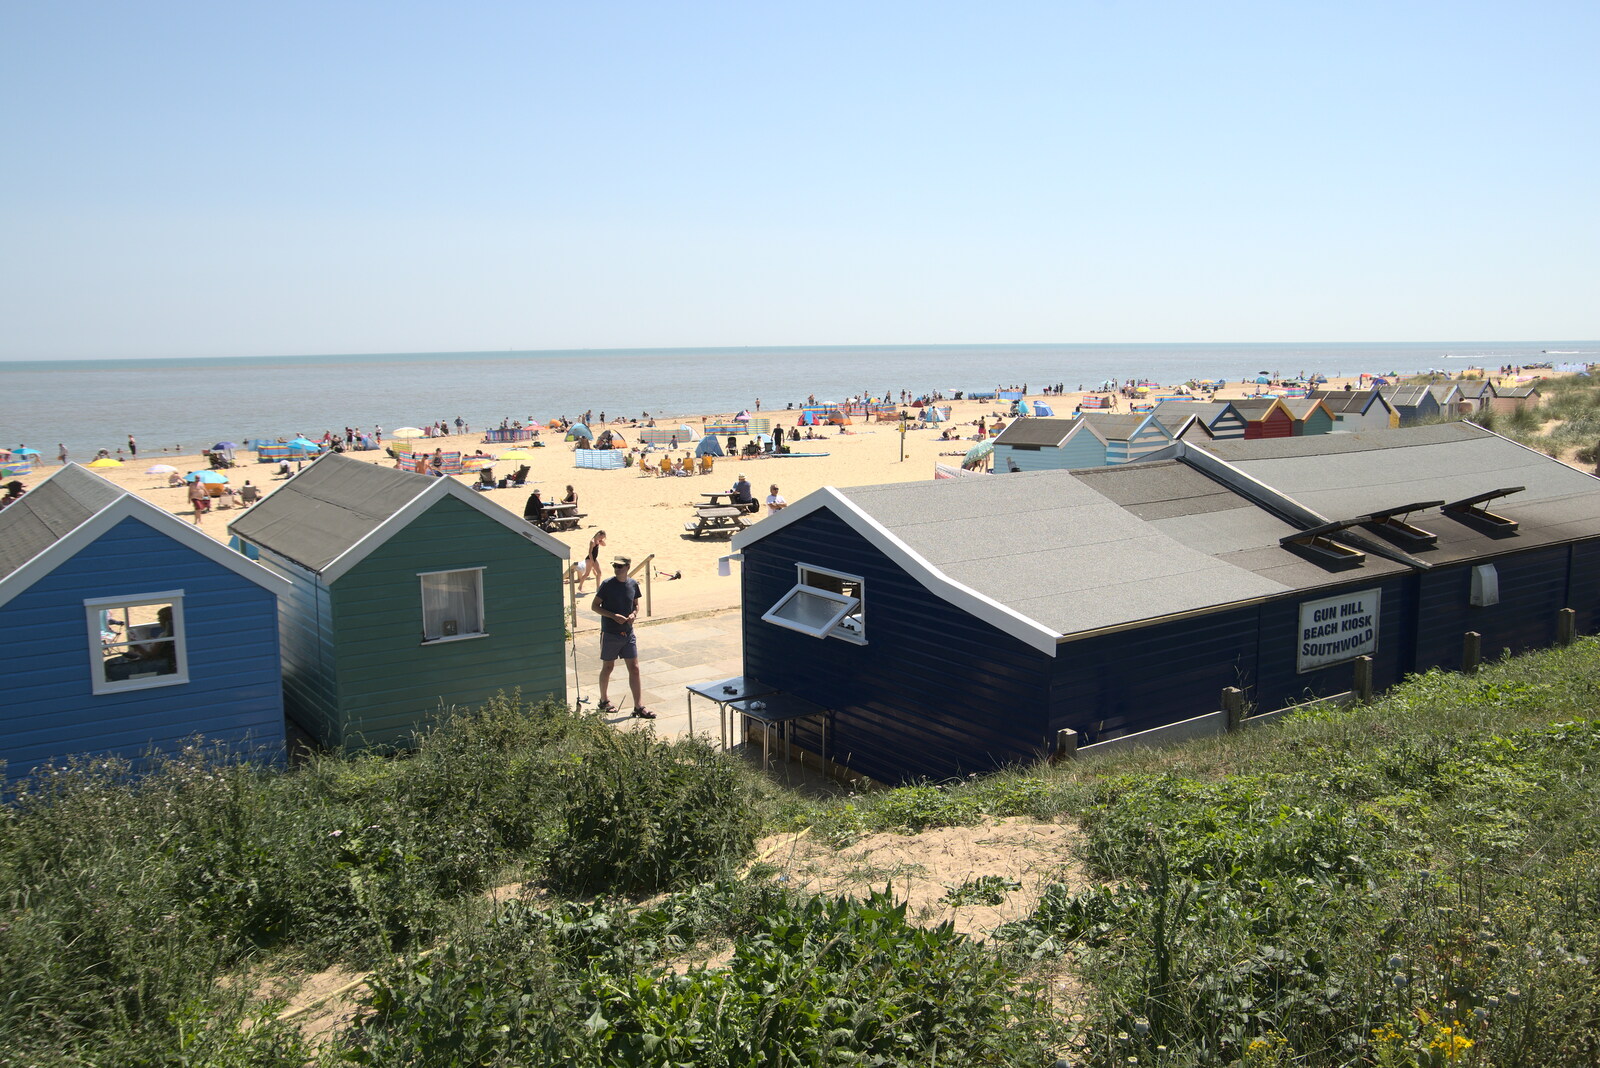 The beach is packed, at least by Southwold standards from A Day on the Beach, Southwold, Suffolk - 18th July 2021